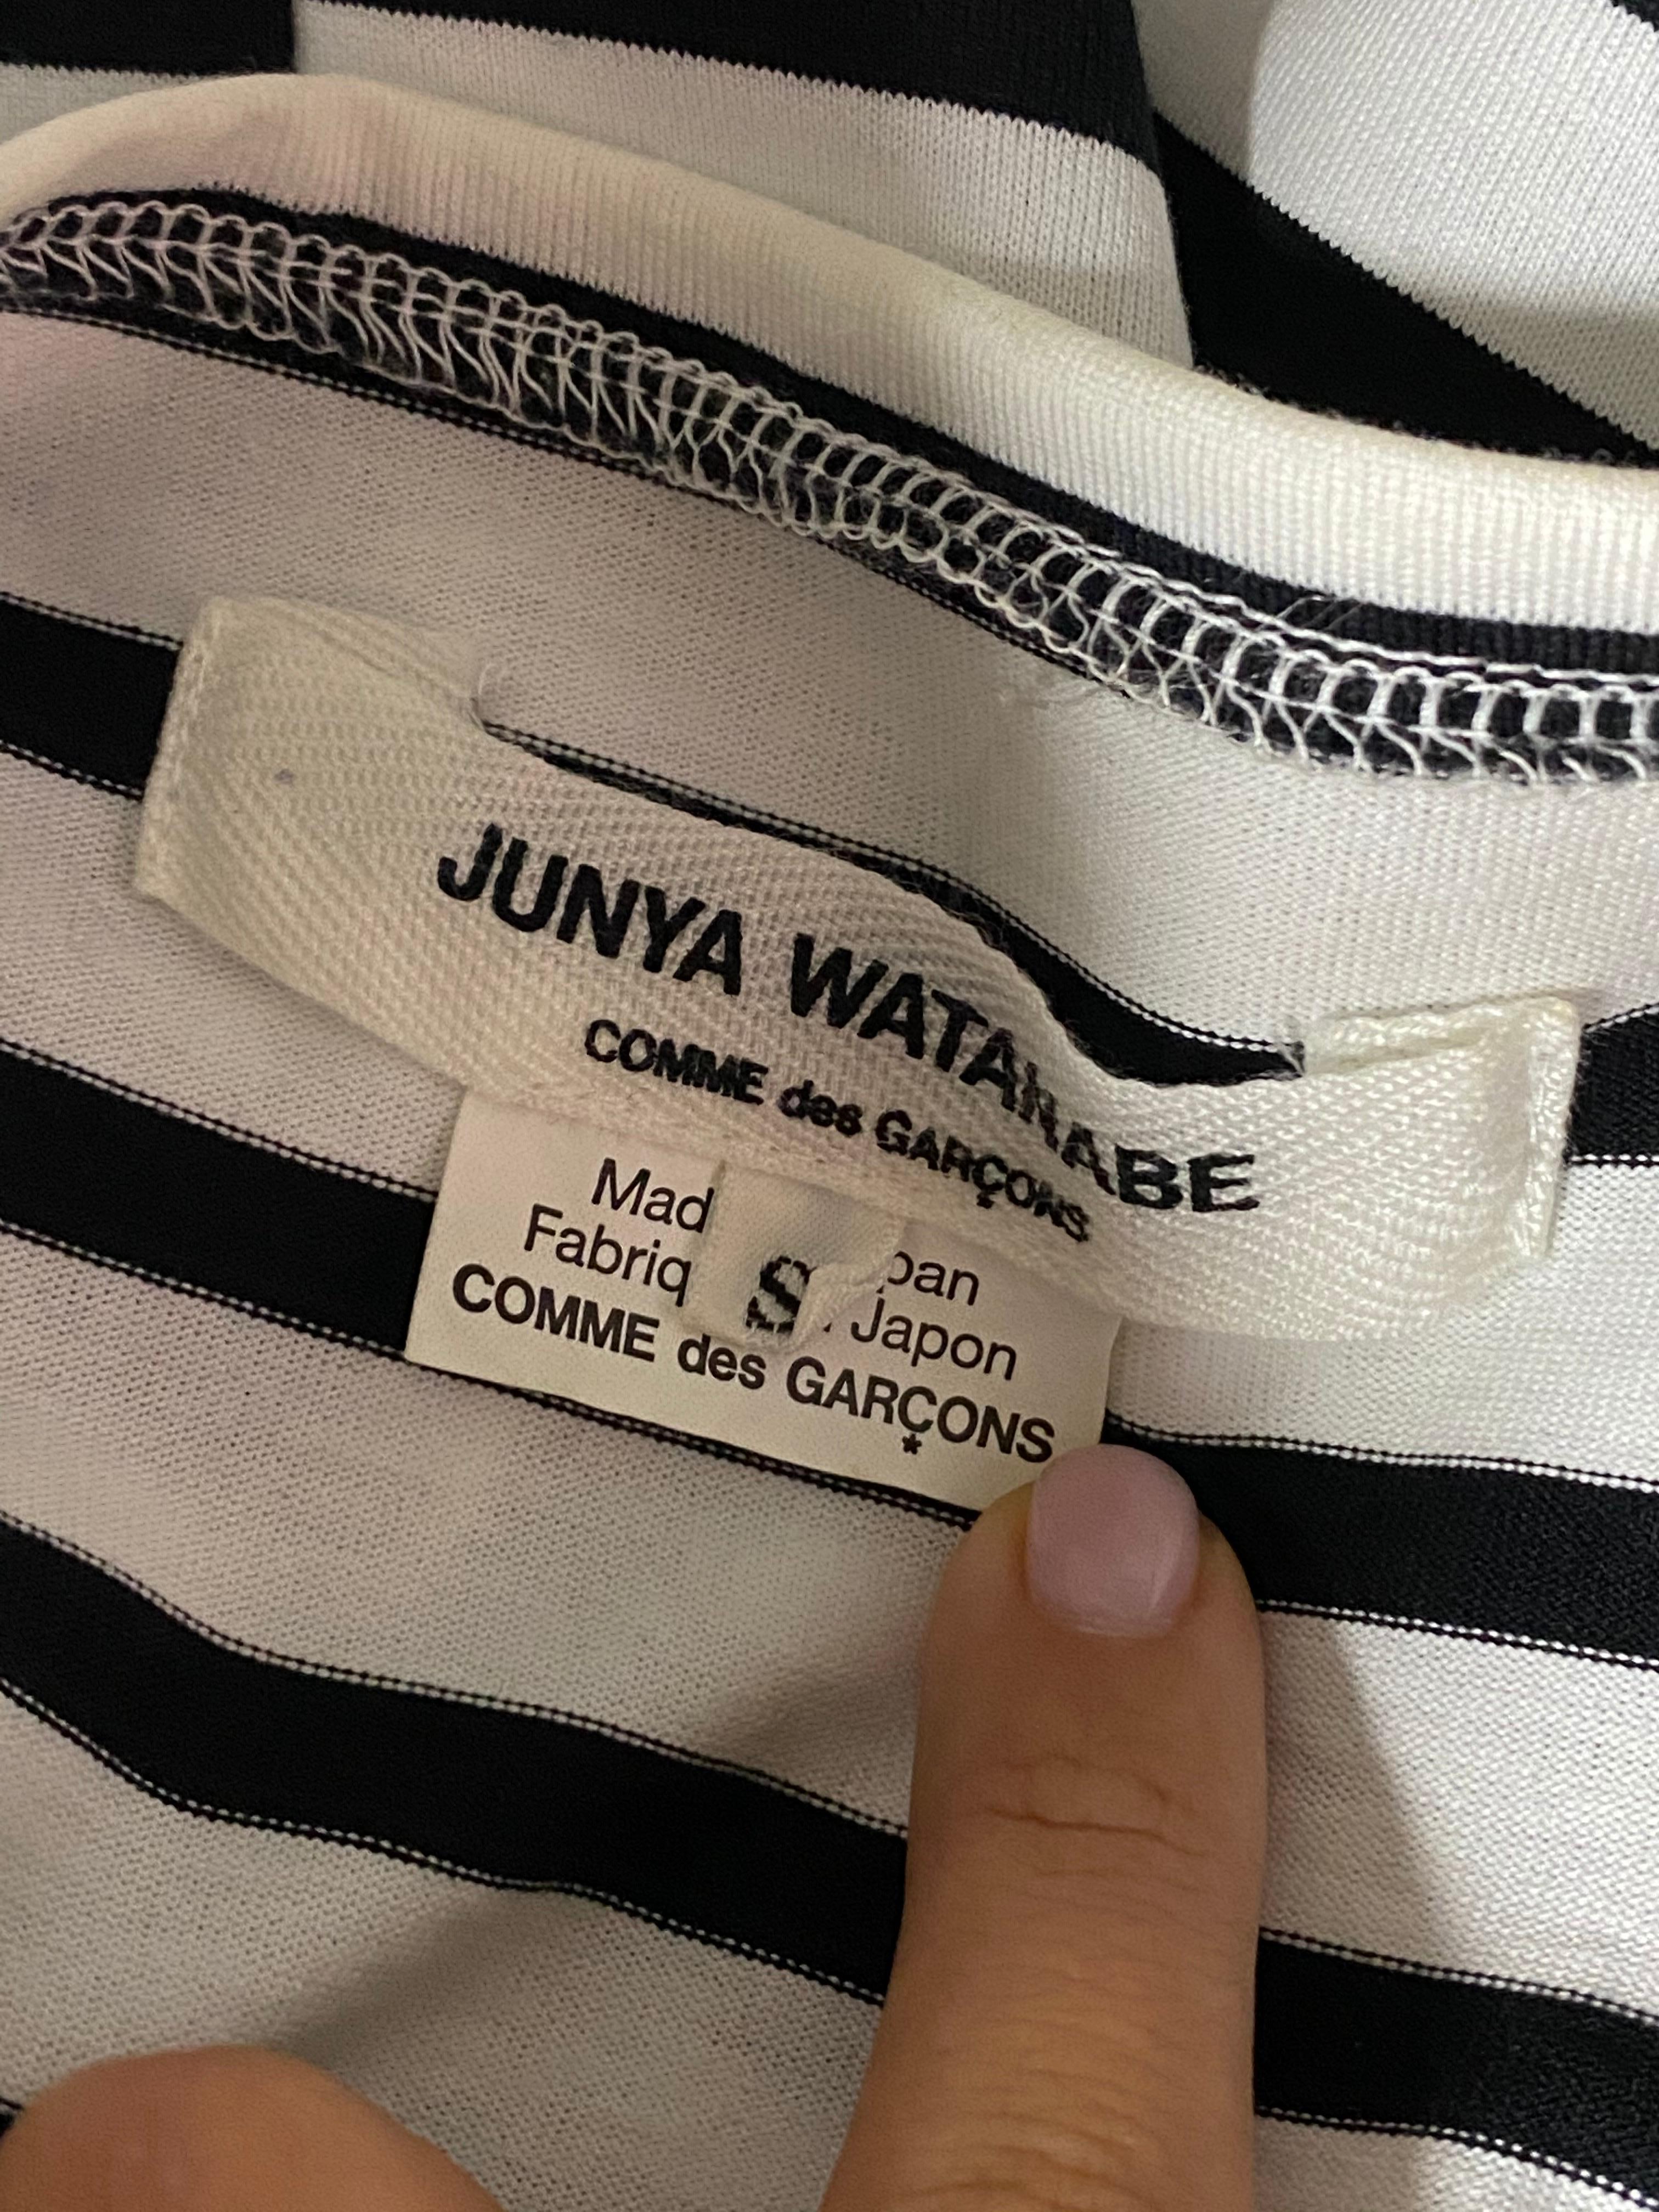 Women's Junya Watanabe Comme Des Garcons Black and White Striped Mini Dress, Size S